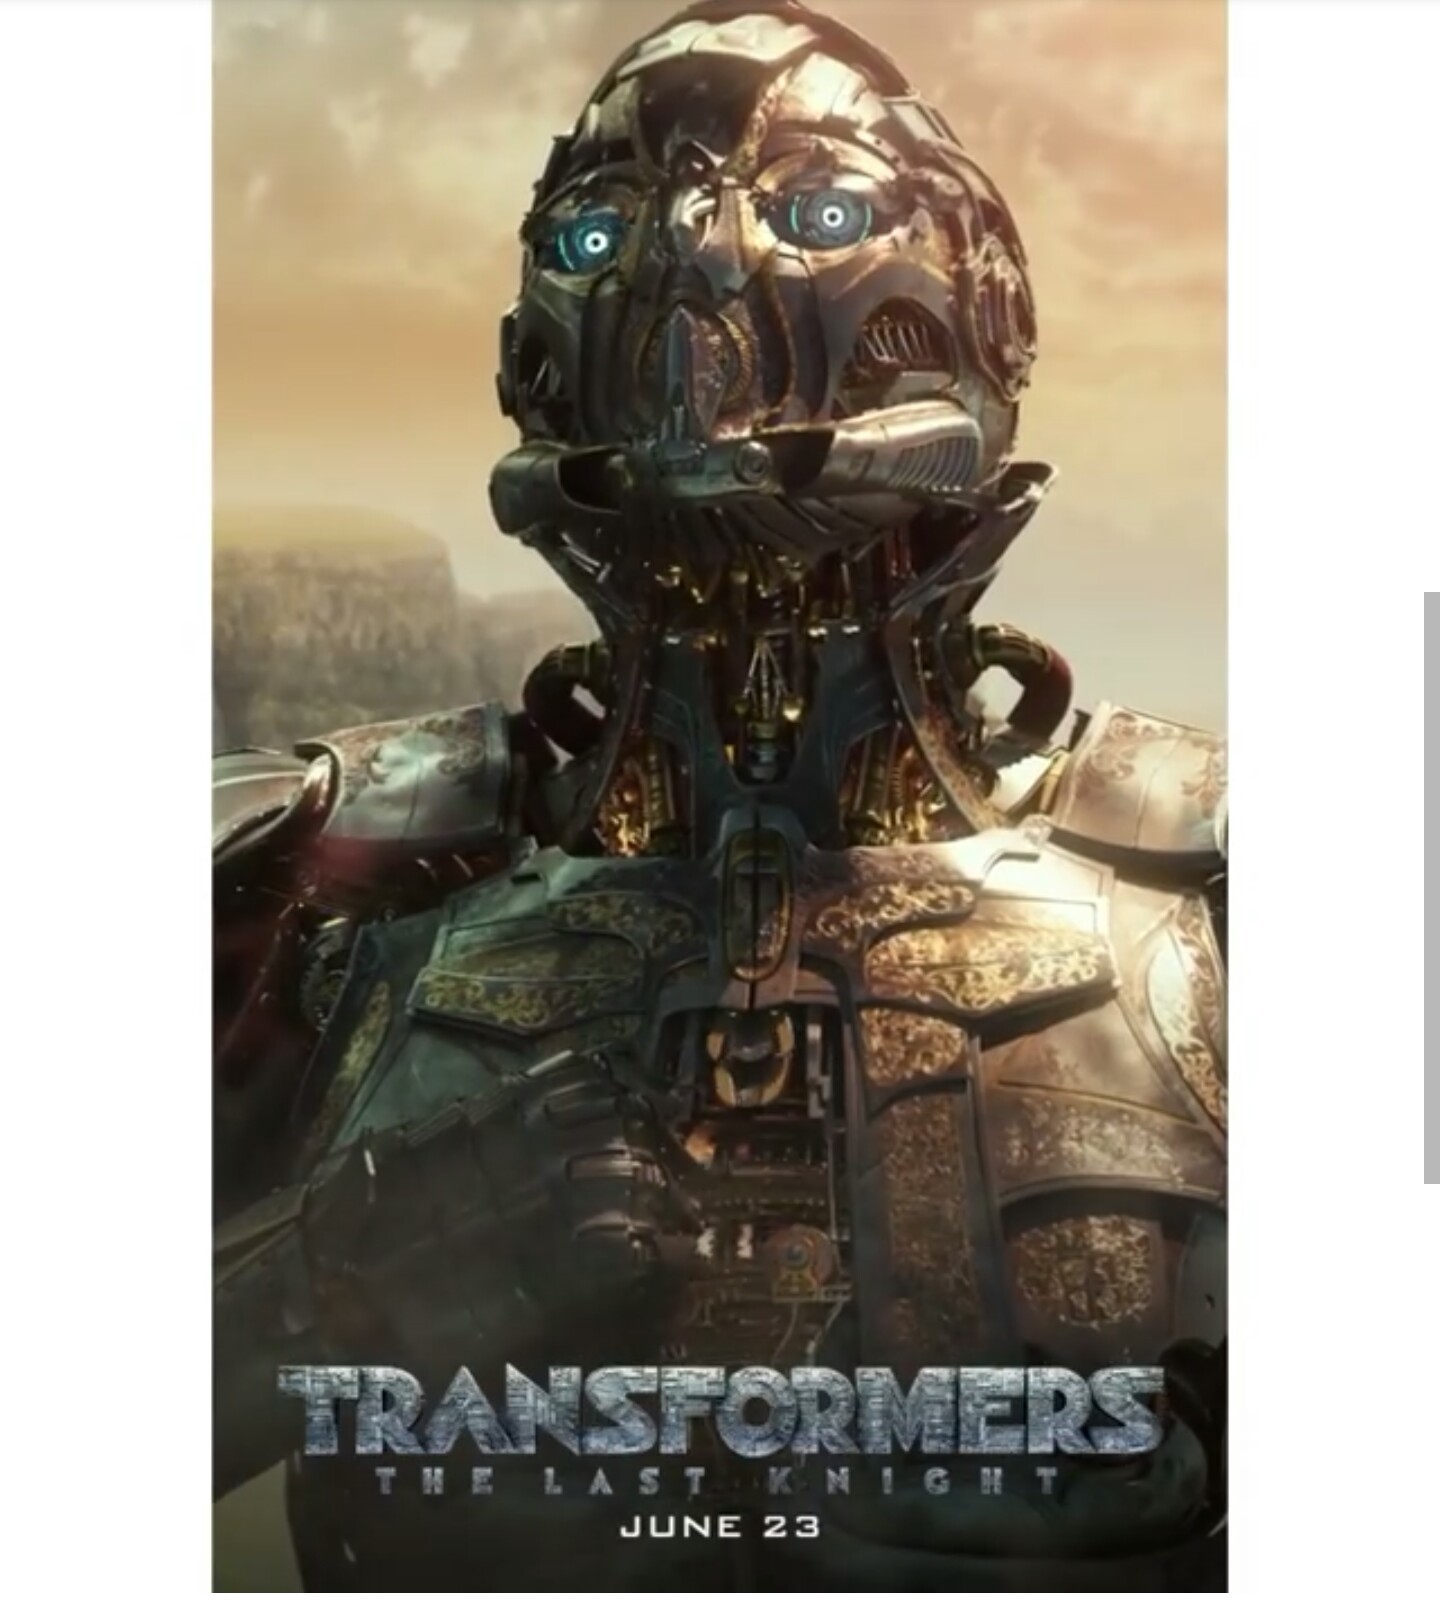 Transformers News: Re: Transformers: The Last Knight Discussion Thread